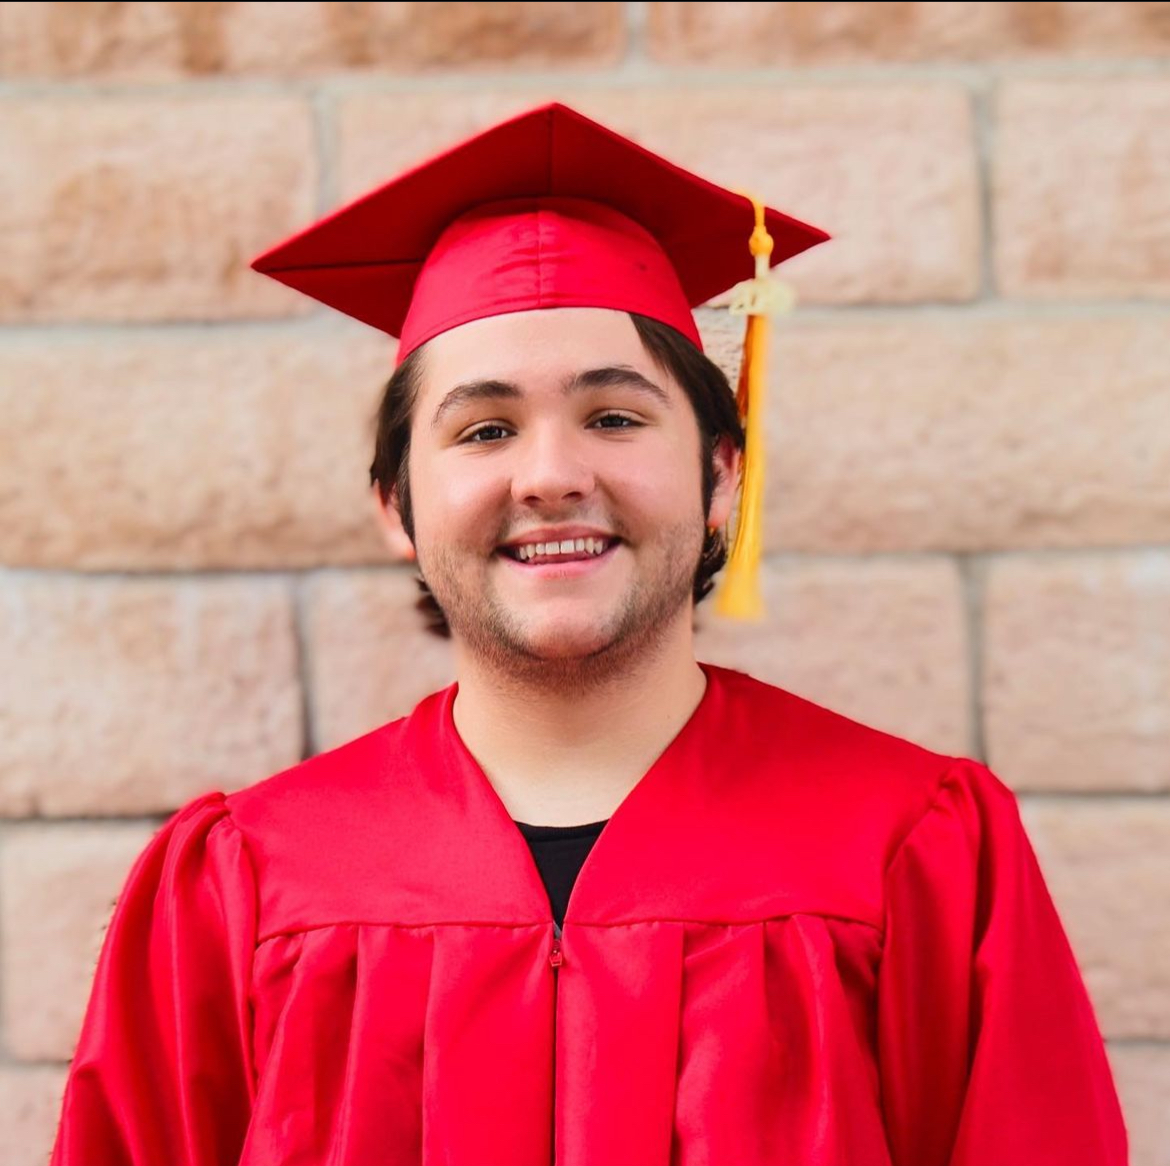 One of my graduation photos from 2020